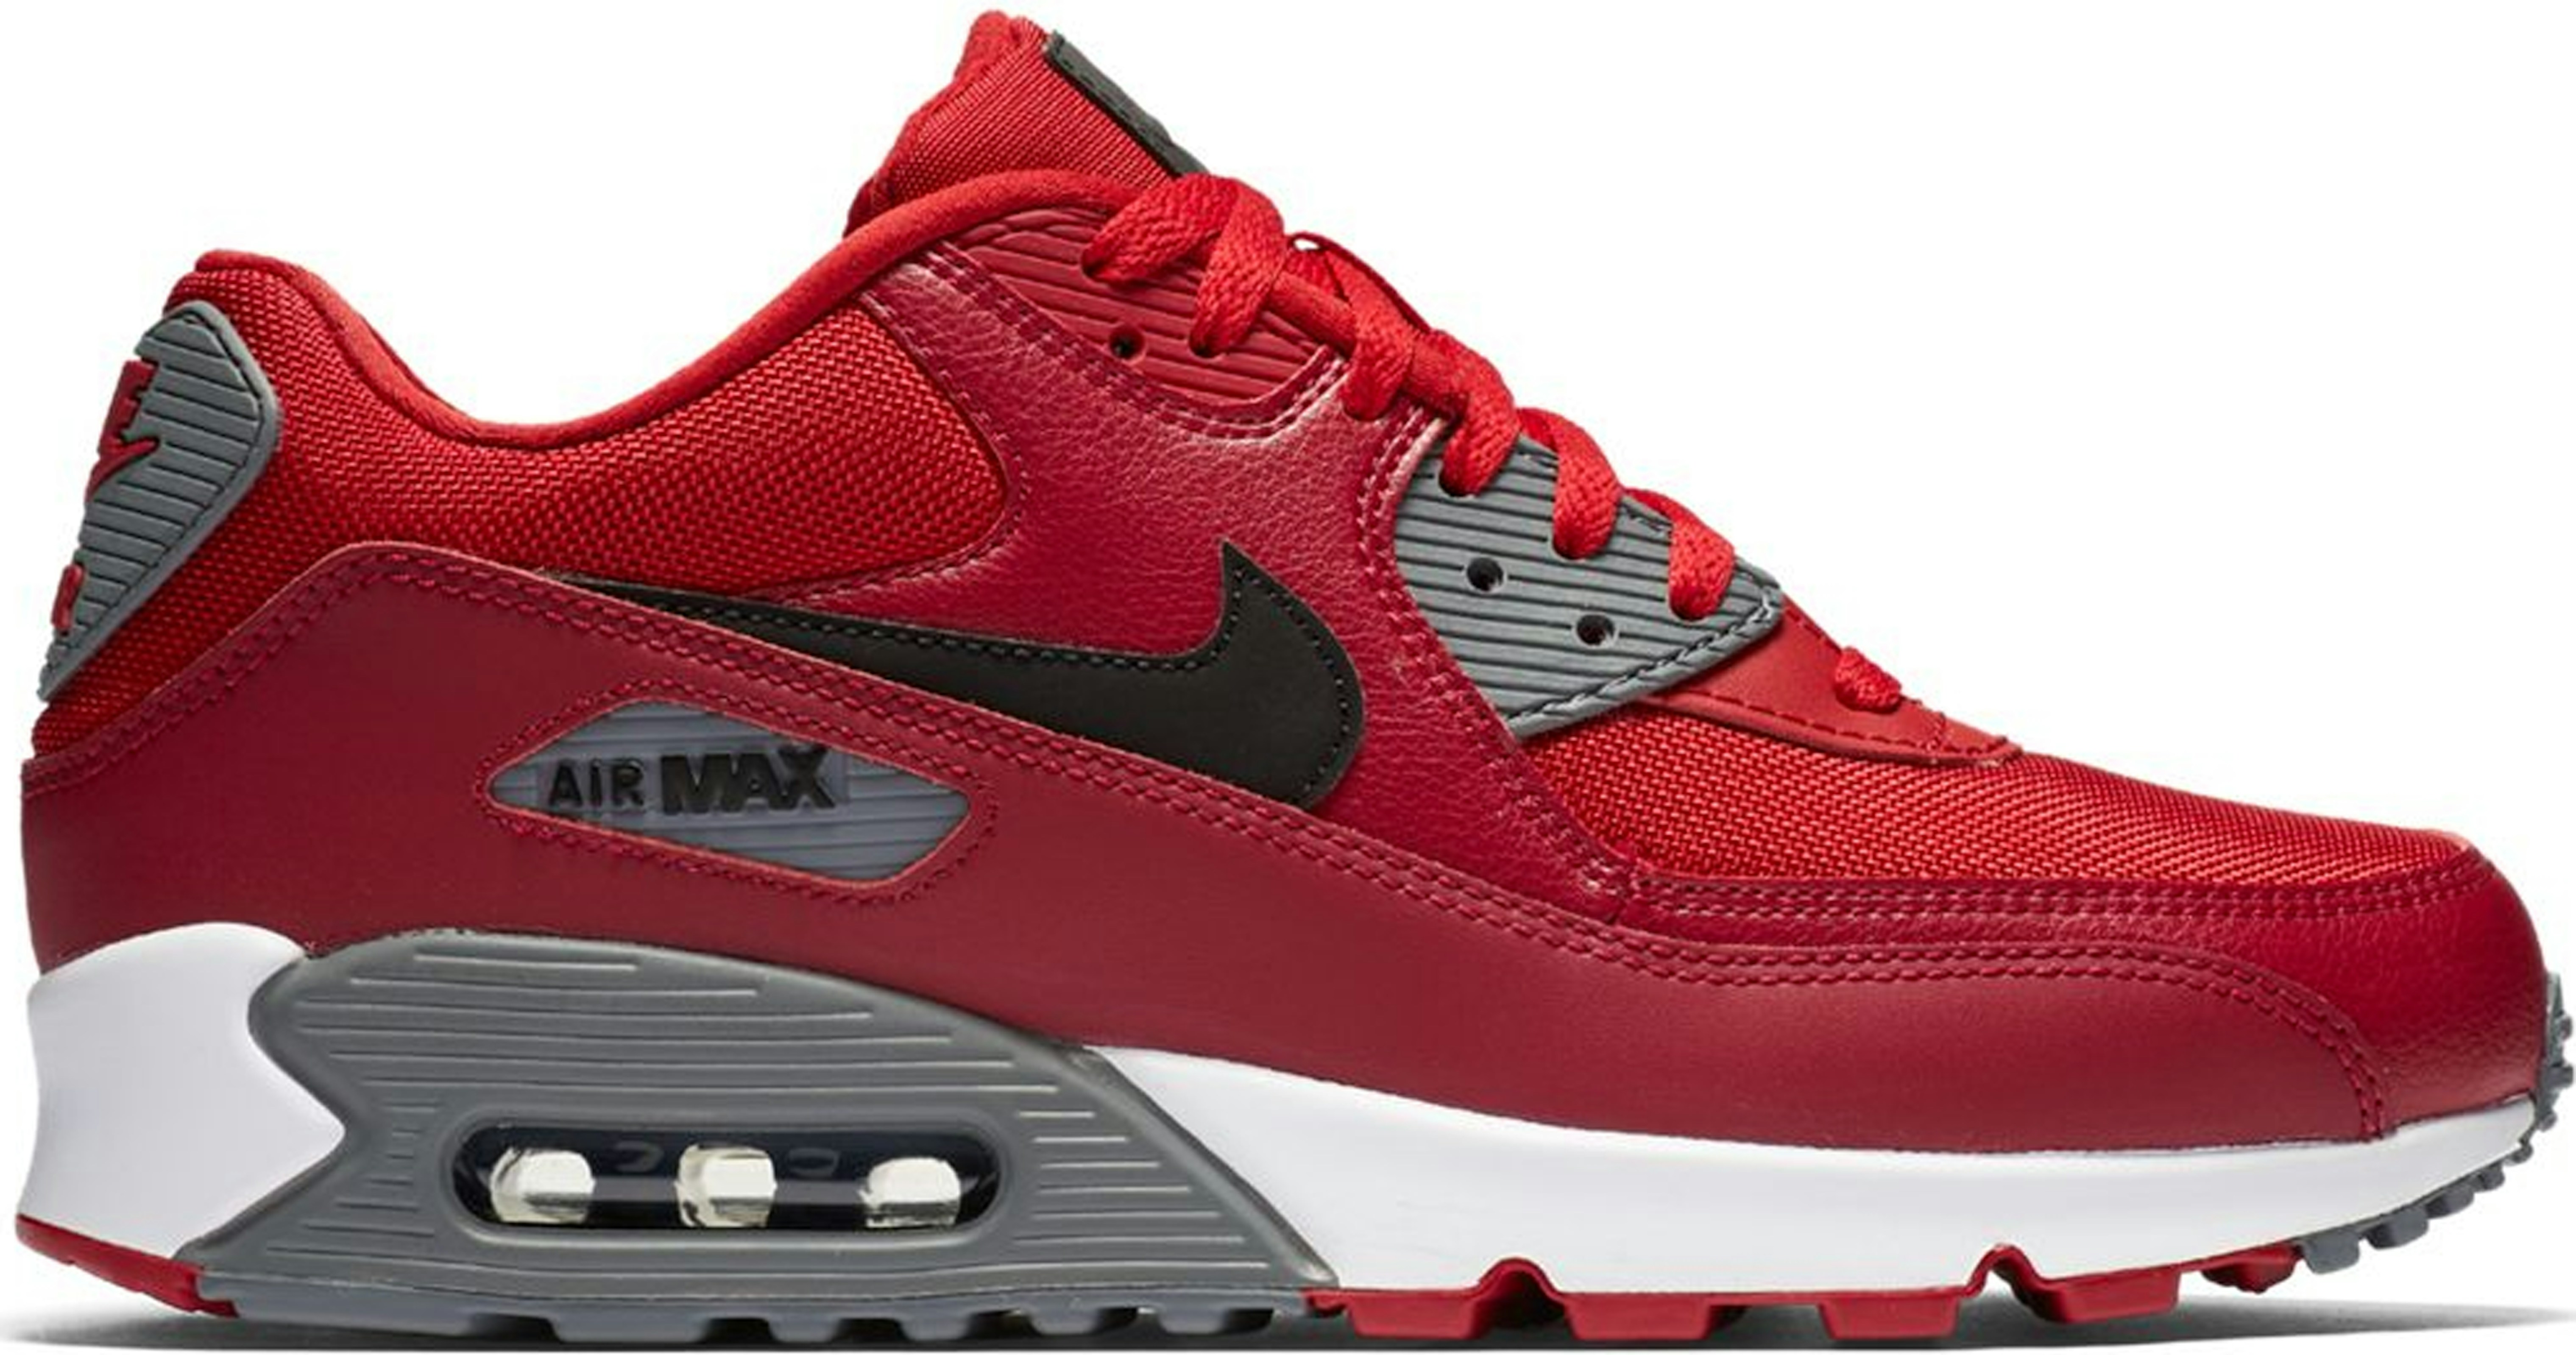 Nike Air Max 90 Gym Red Noble Red - 537384-606